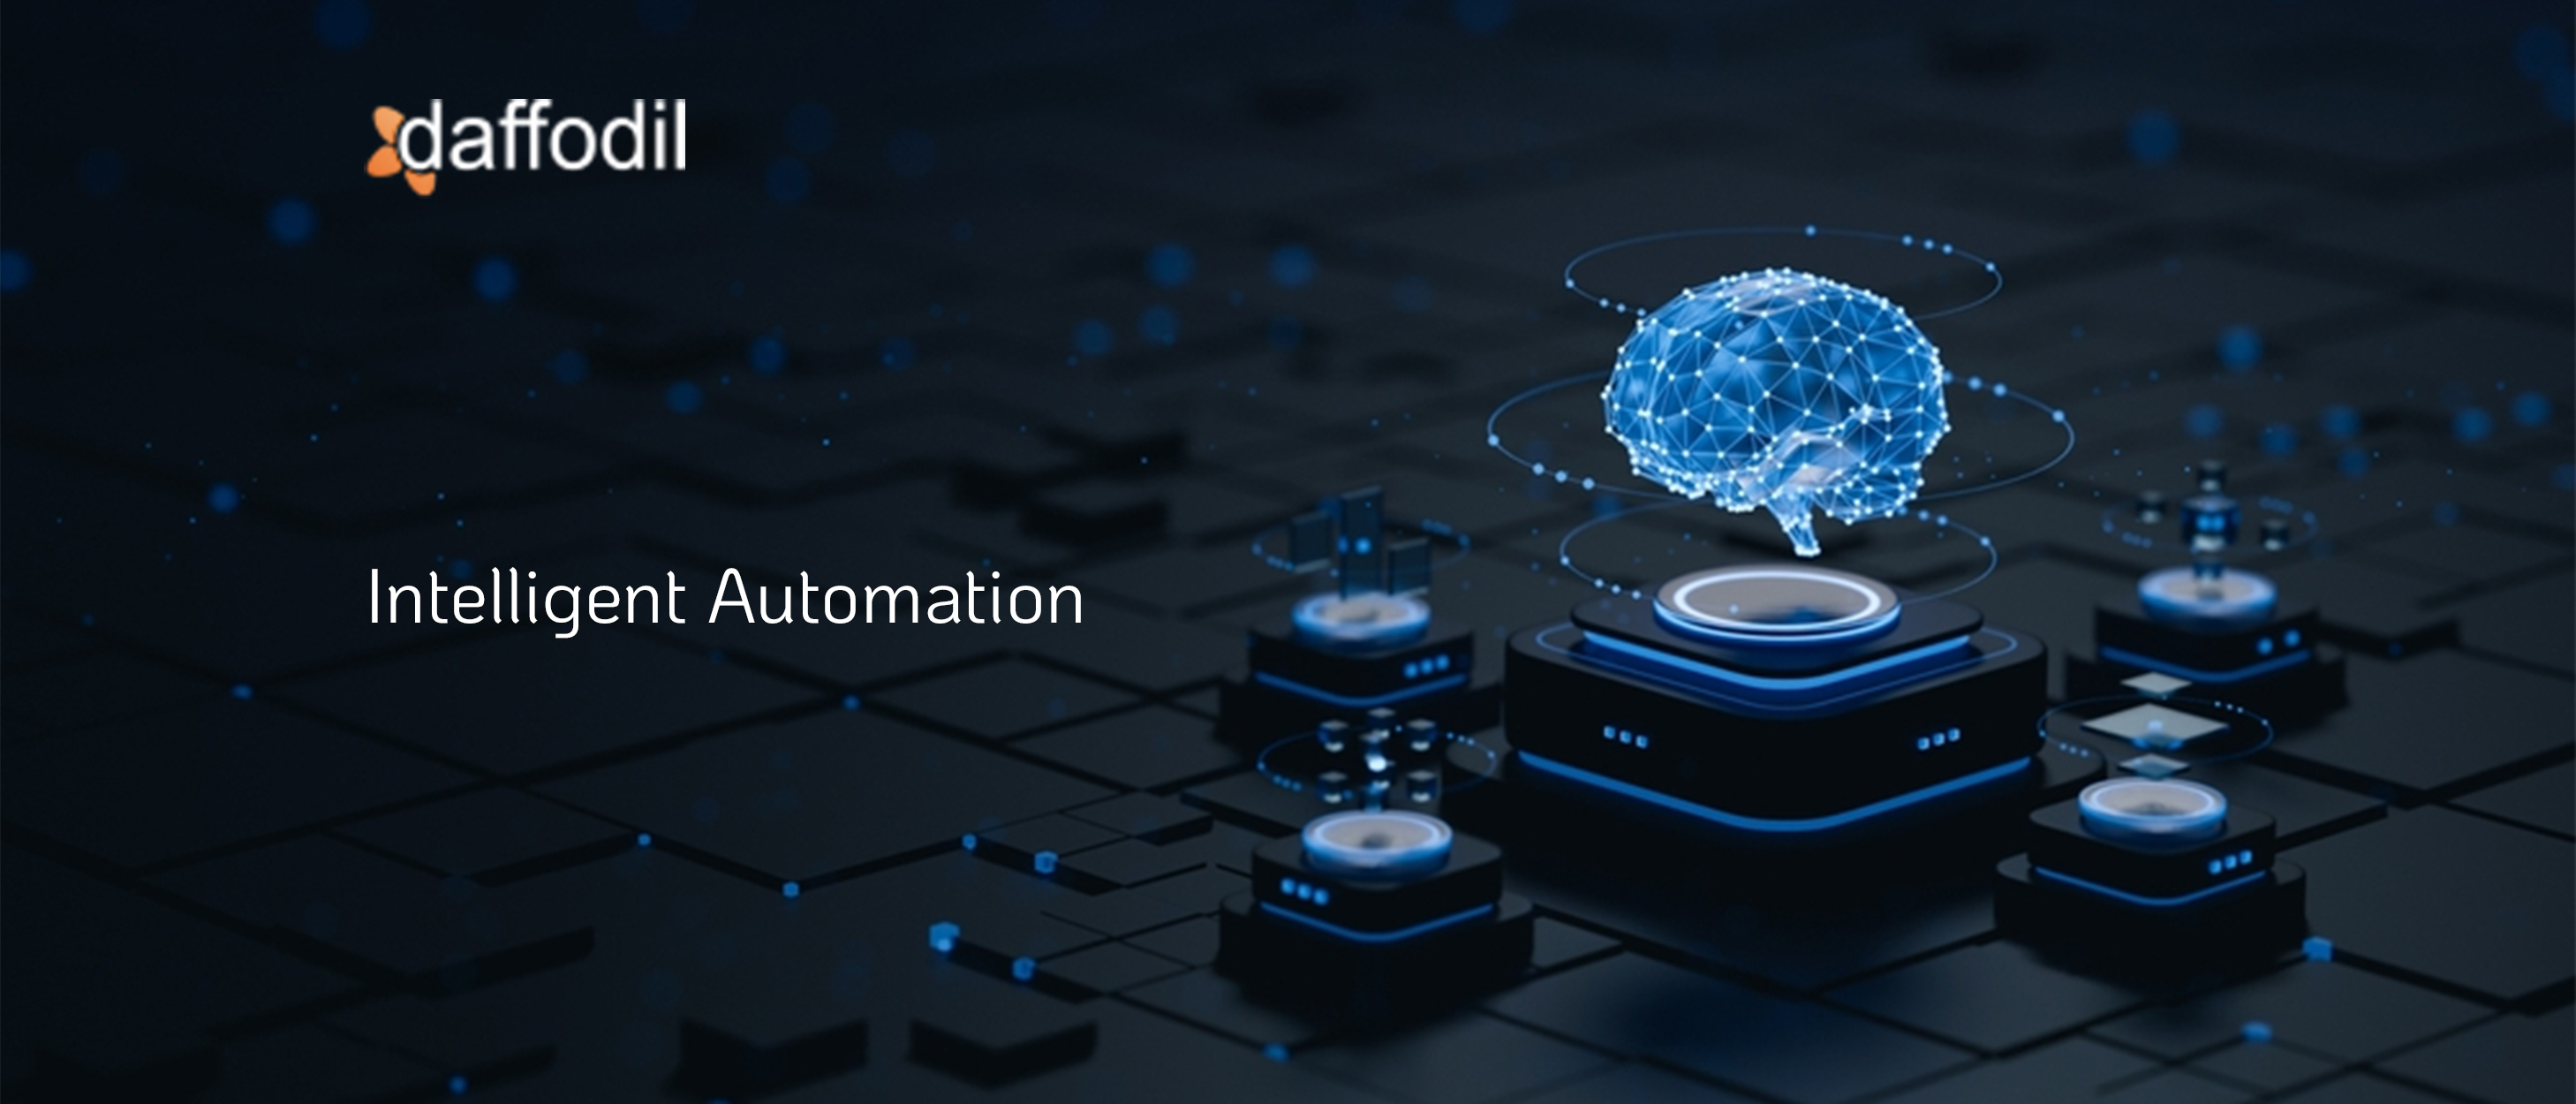 What is Intelligent Automation?